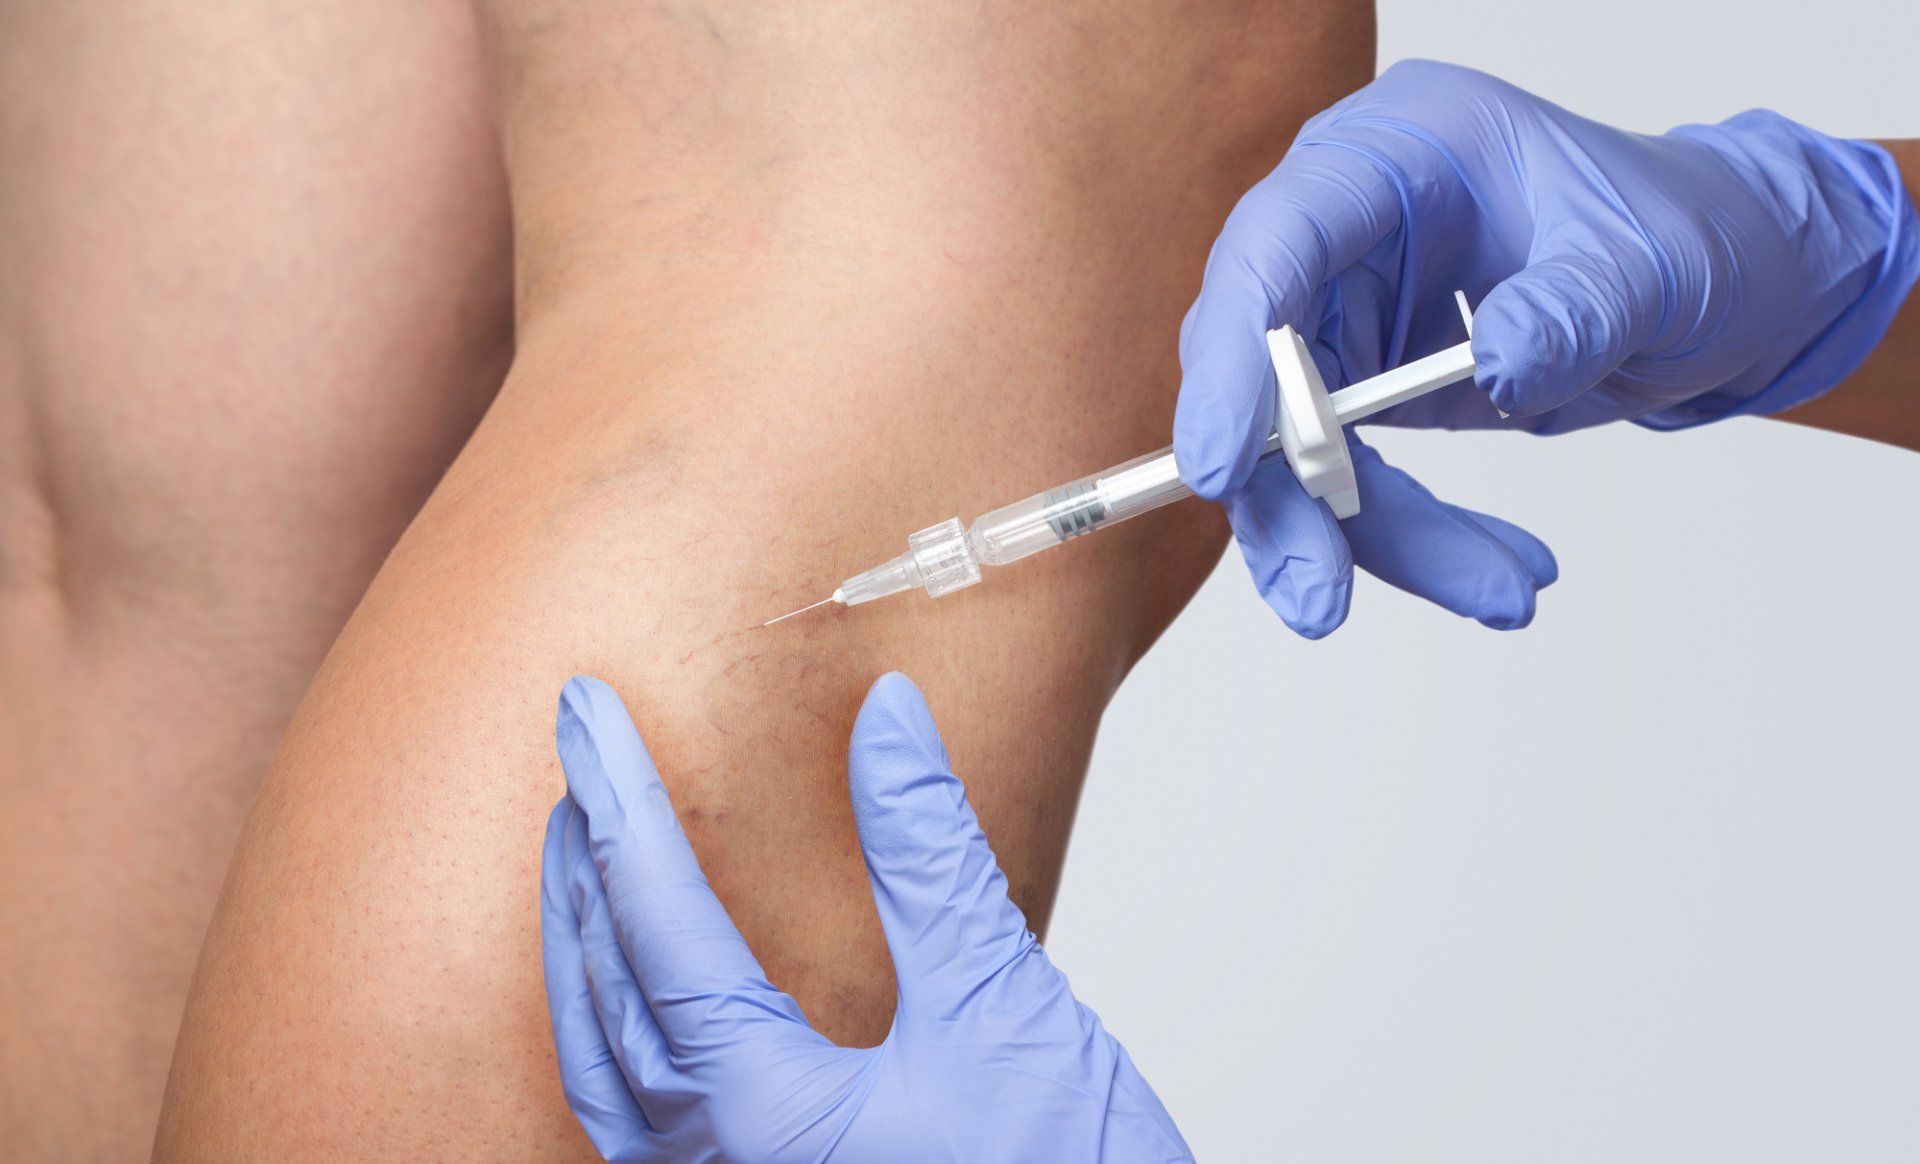 doctor injecting treatment into legs for spider veins